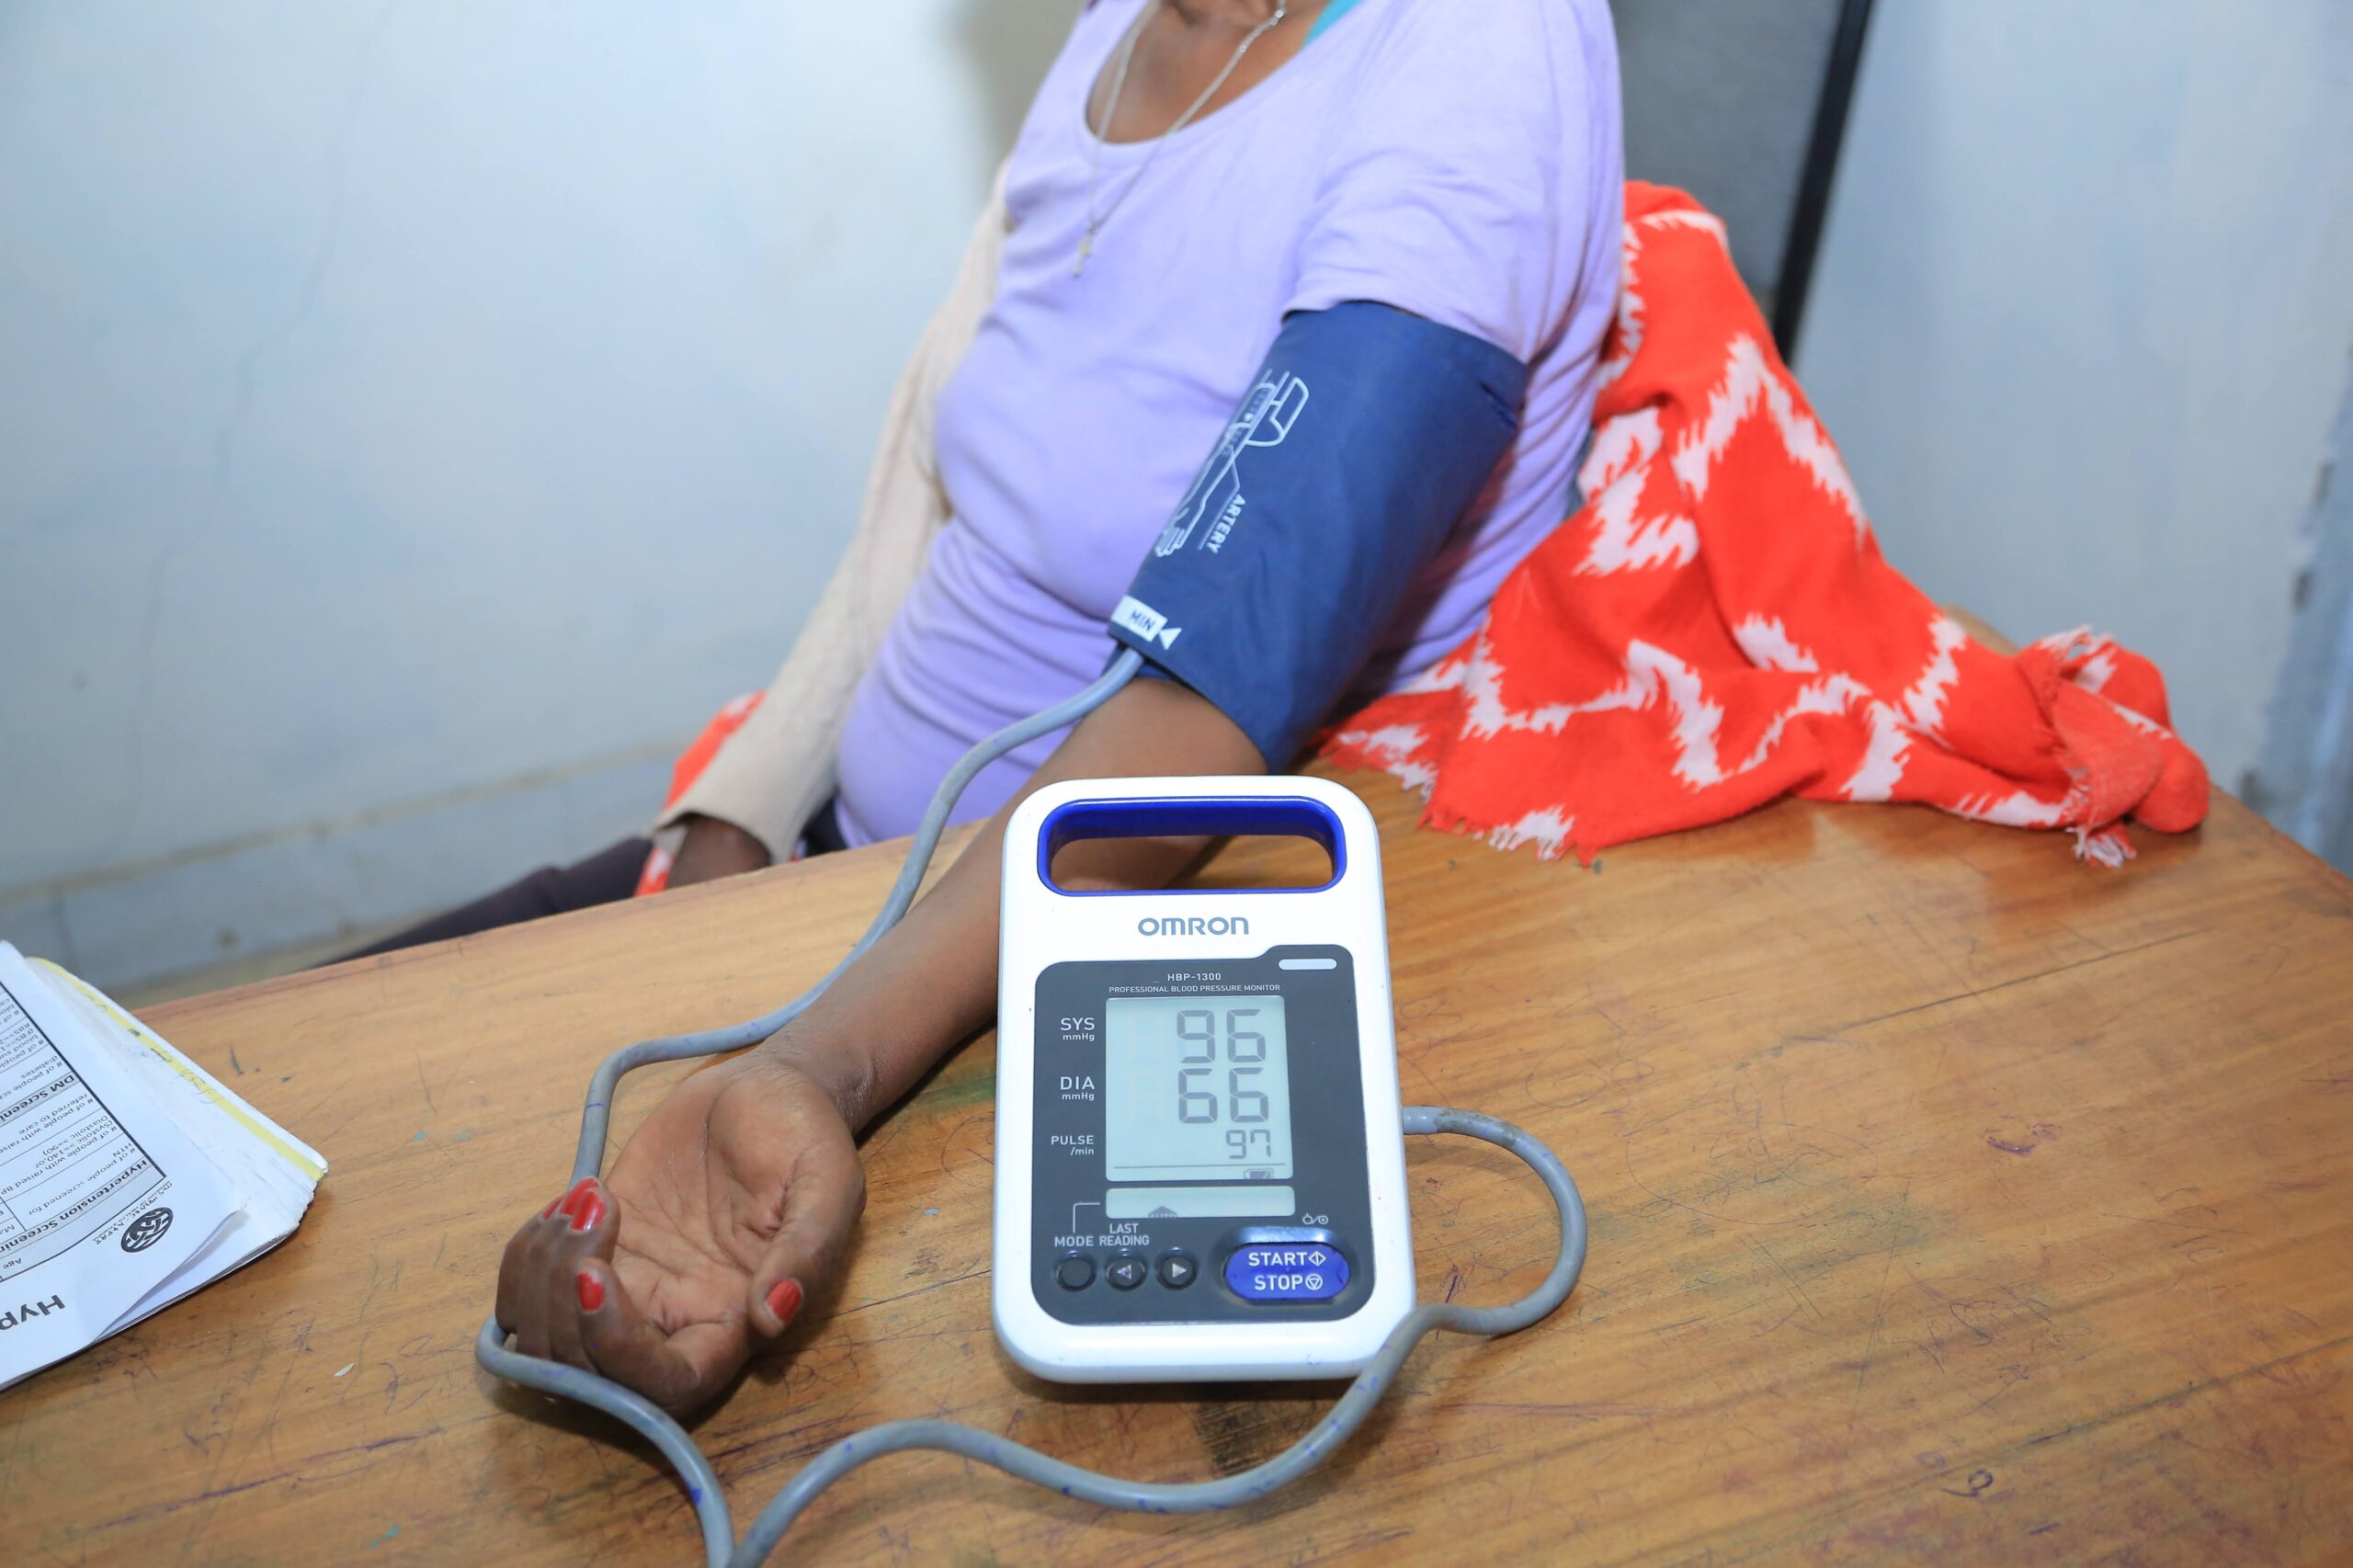 Patient gets blood pressure measured to check for hypertension. Managing hypertension can save lives